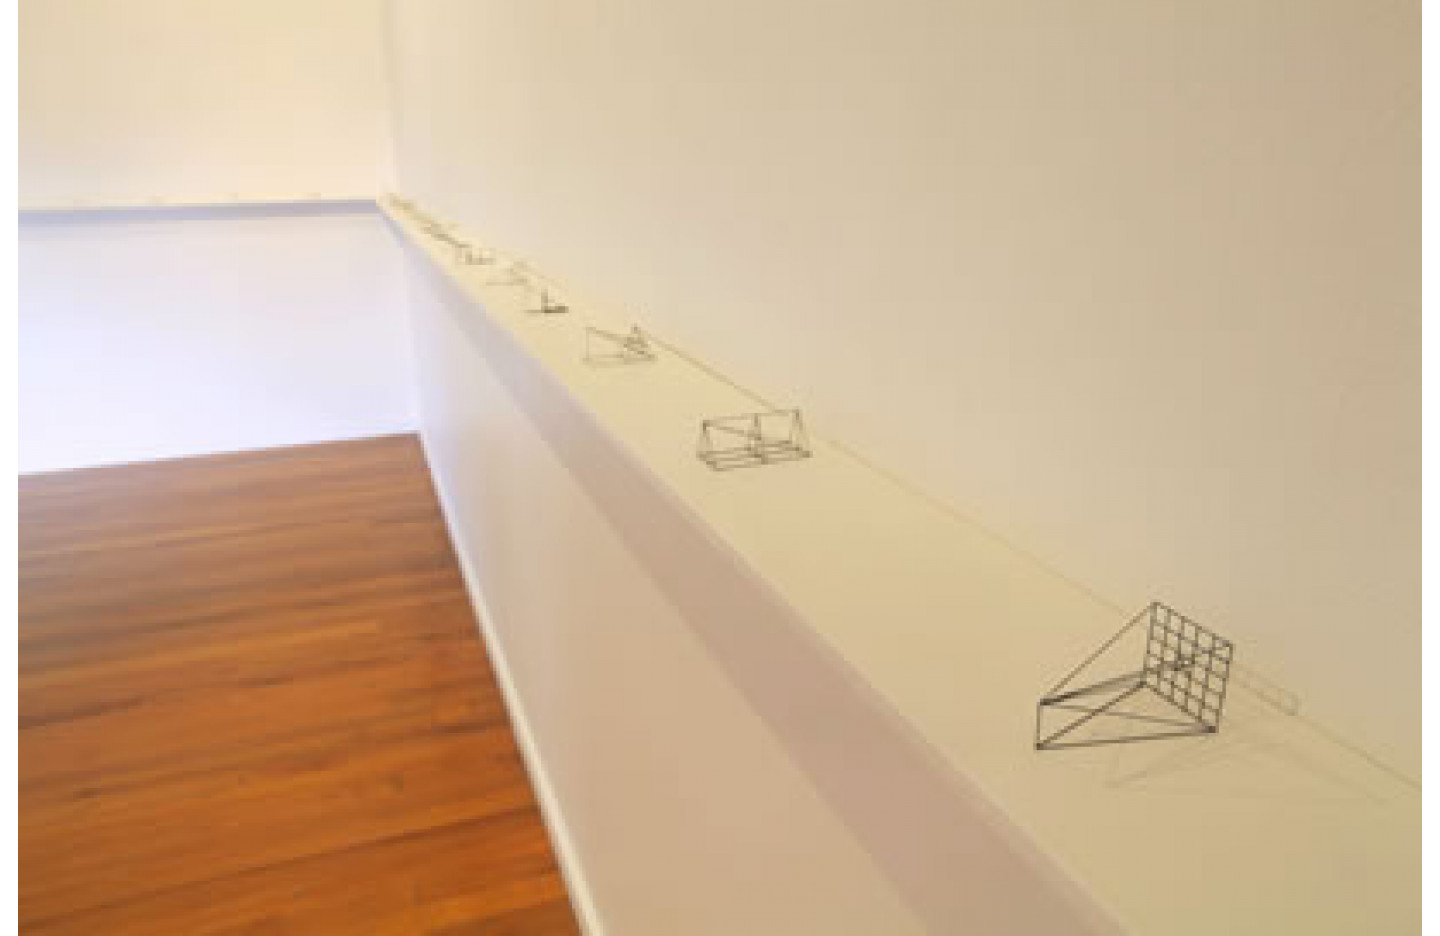 Selected Proofs, Ramp Gallery (2012)